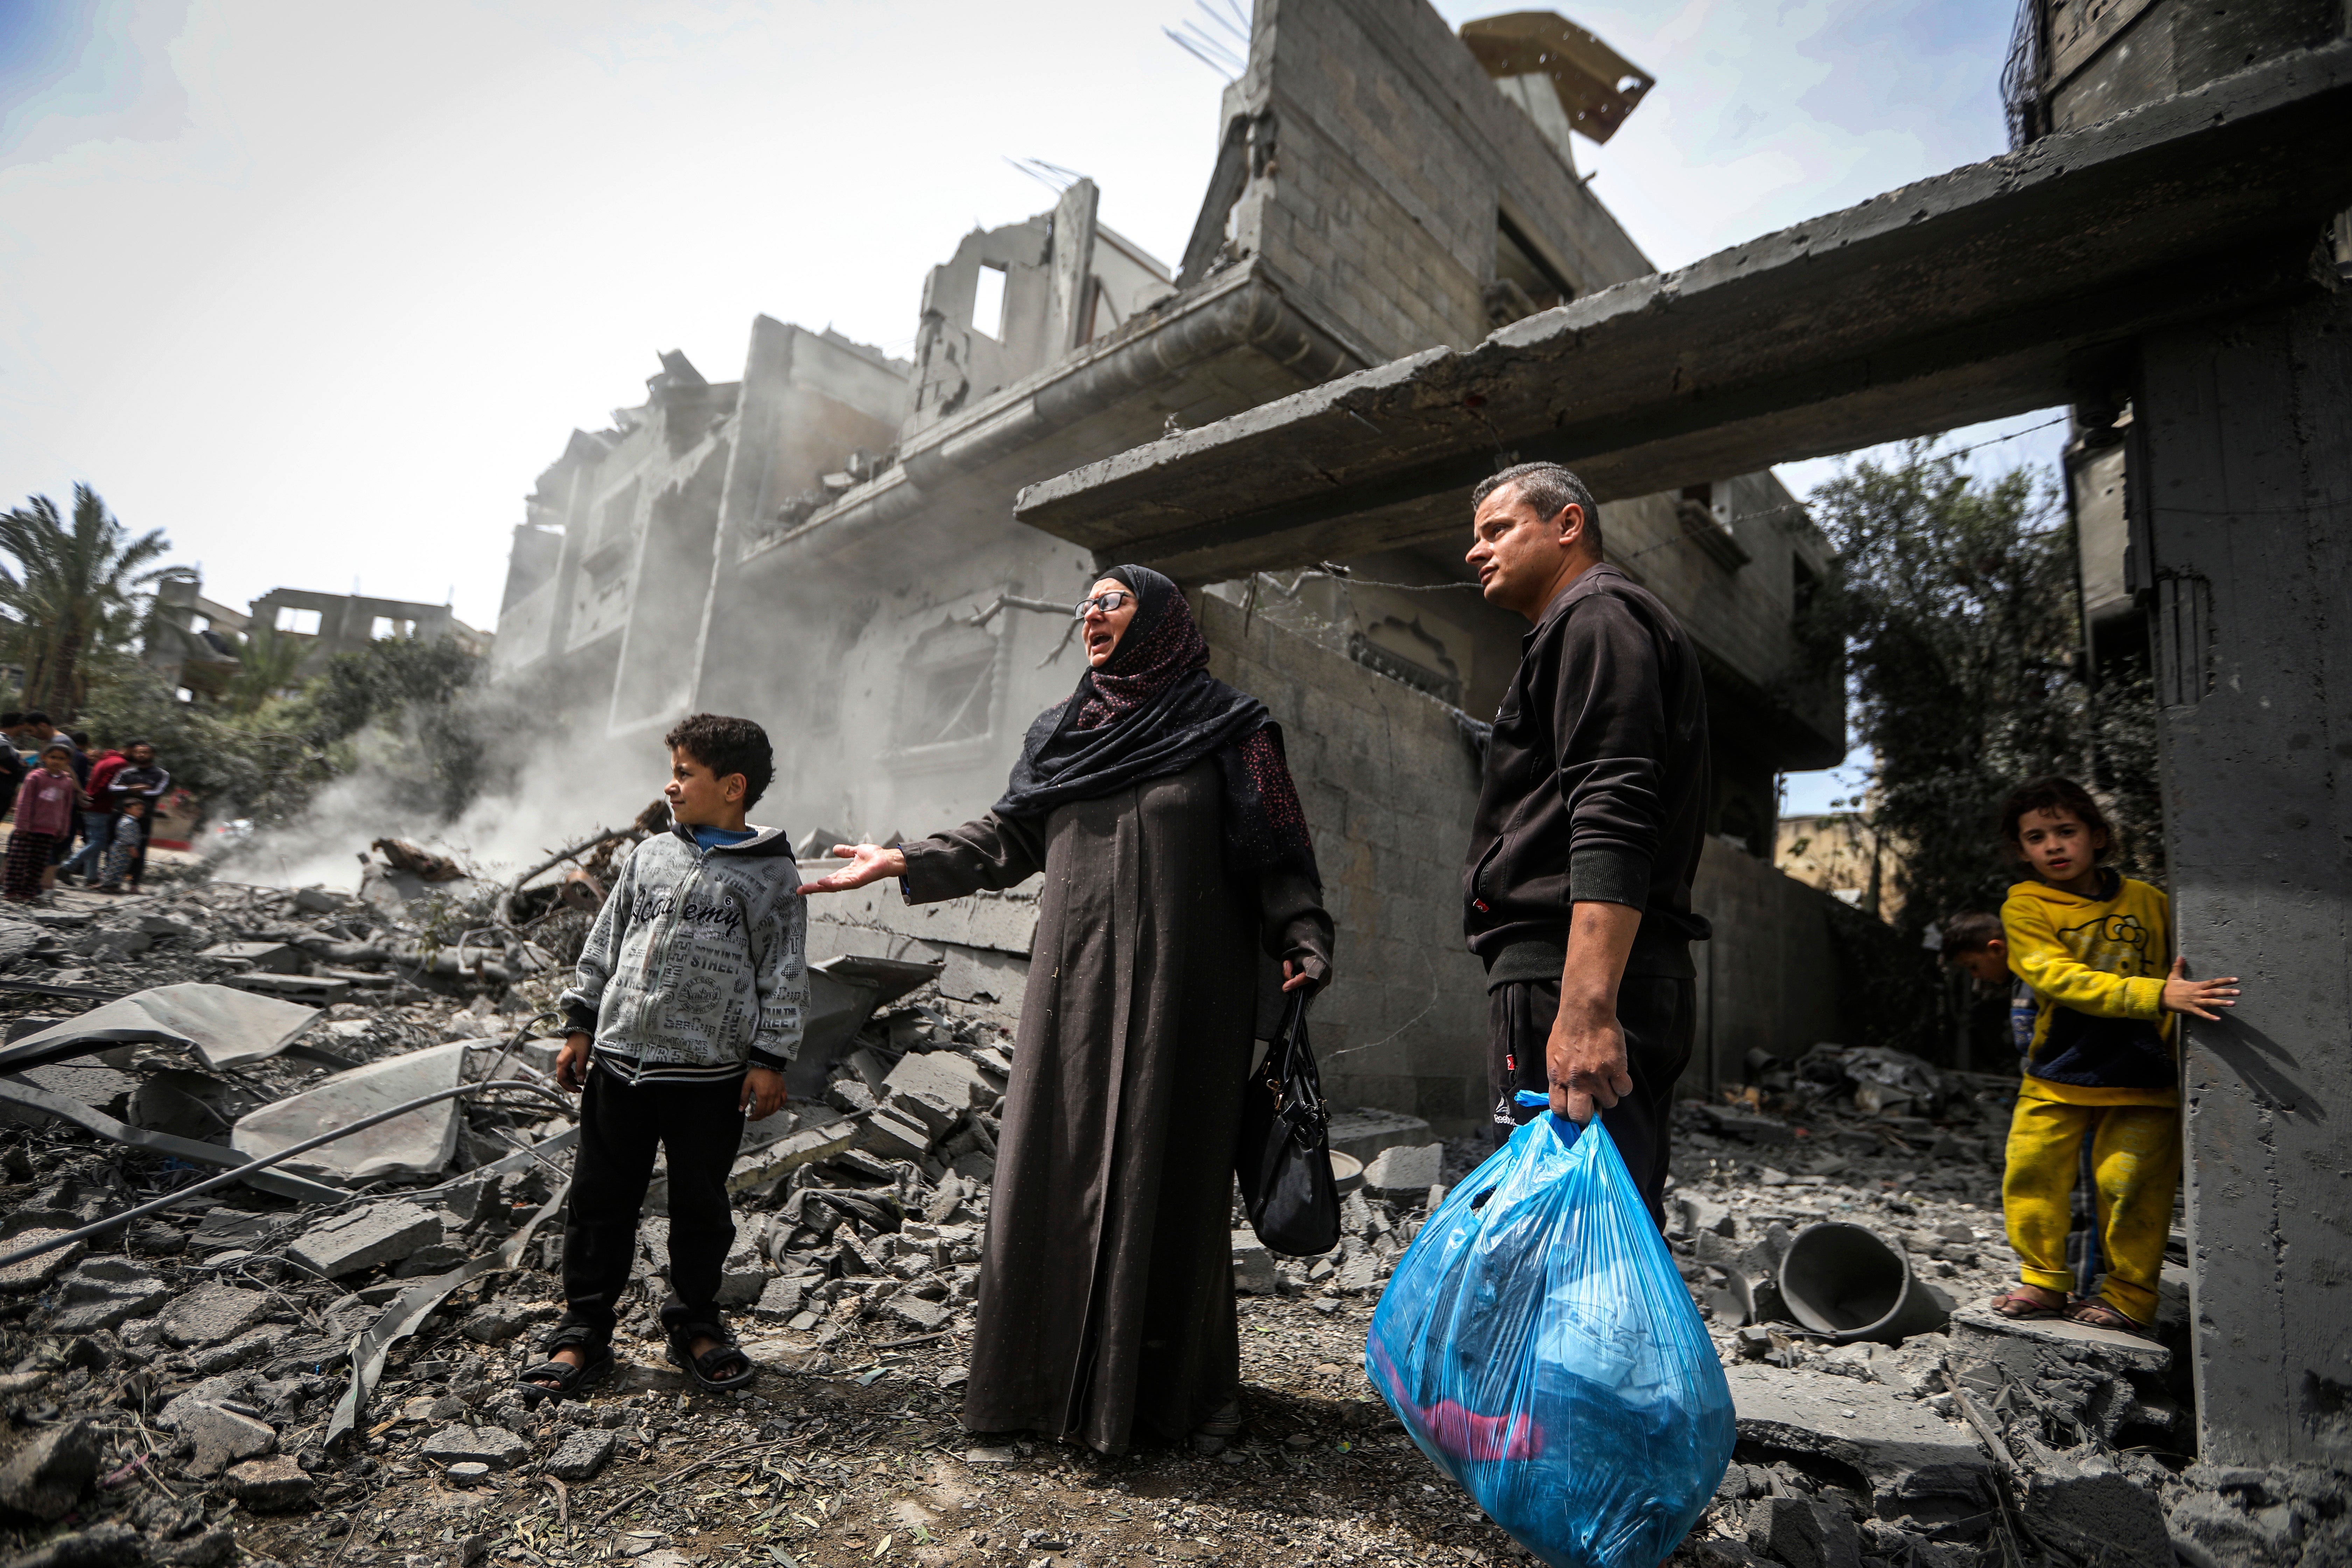 Palestinians collect their belongings from the rubble of a residential building after an Israeli airstrike in the Maghazi refugee camp in the Gaza Strip